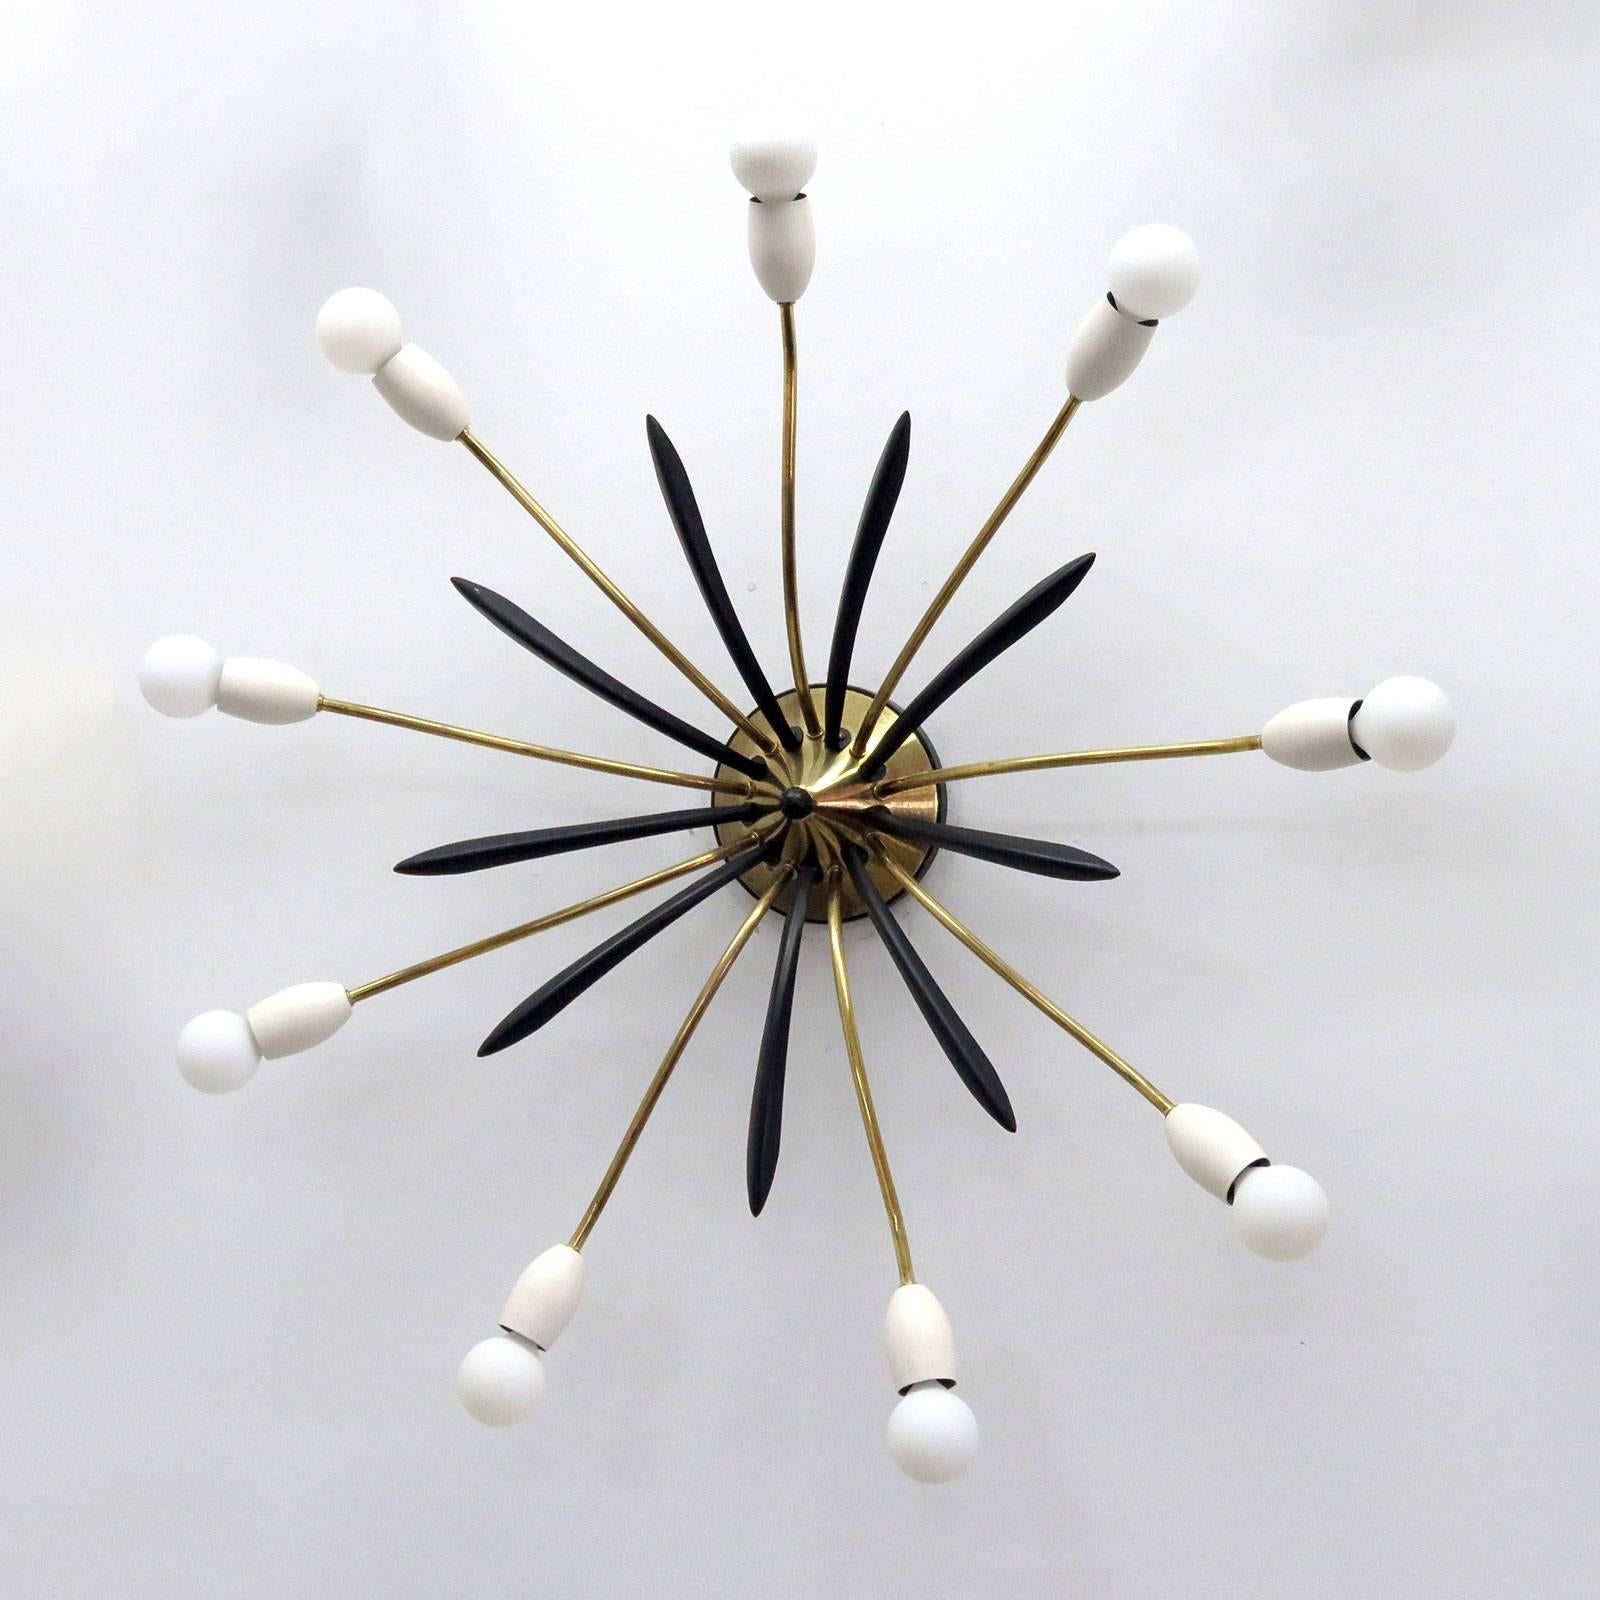 Wonderful large scale German nine-arm Sputnik in brass and enameled metal, can be used as wall or ceiling flush mount fixture.